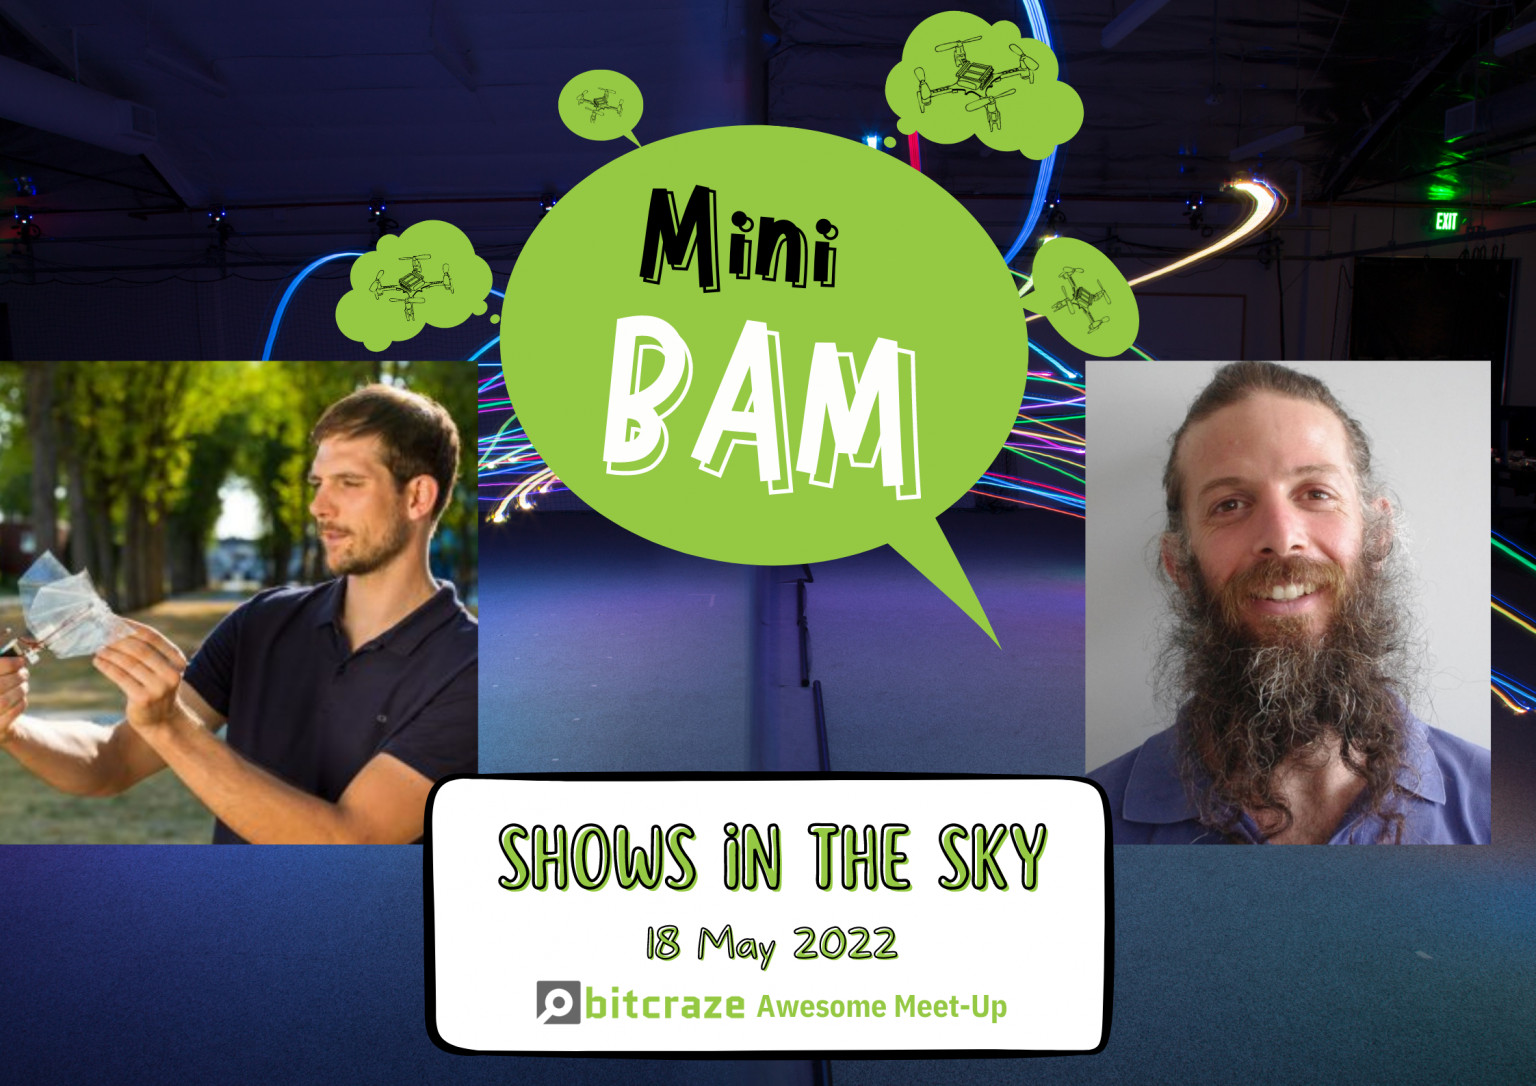 Listen to our talk about Skybrush at the Bitcraze miniBAM